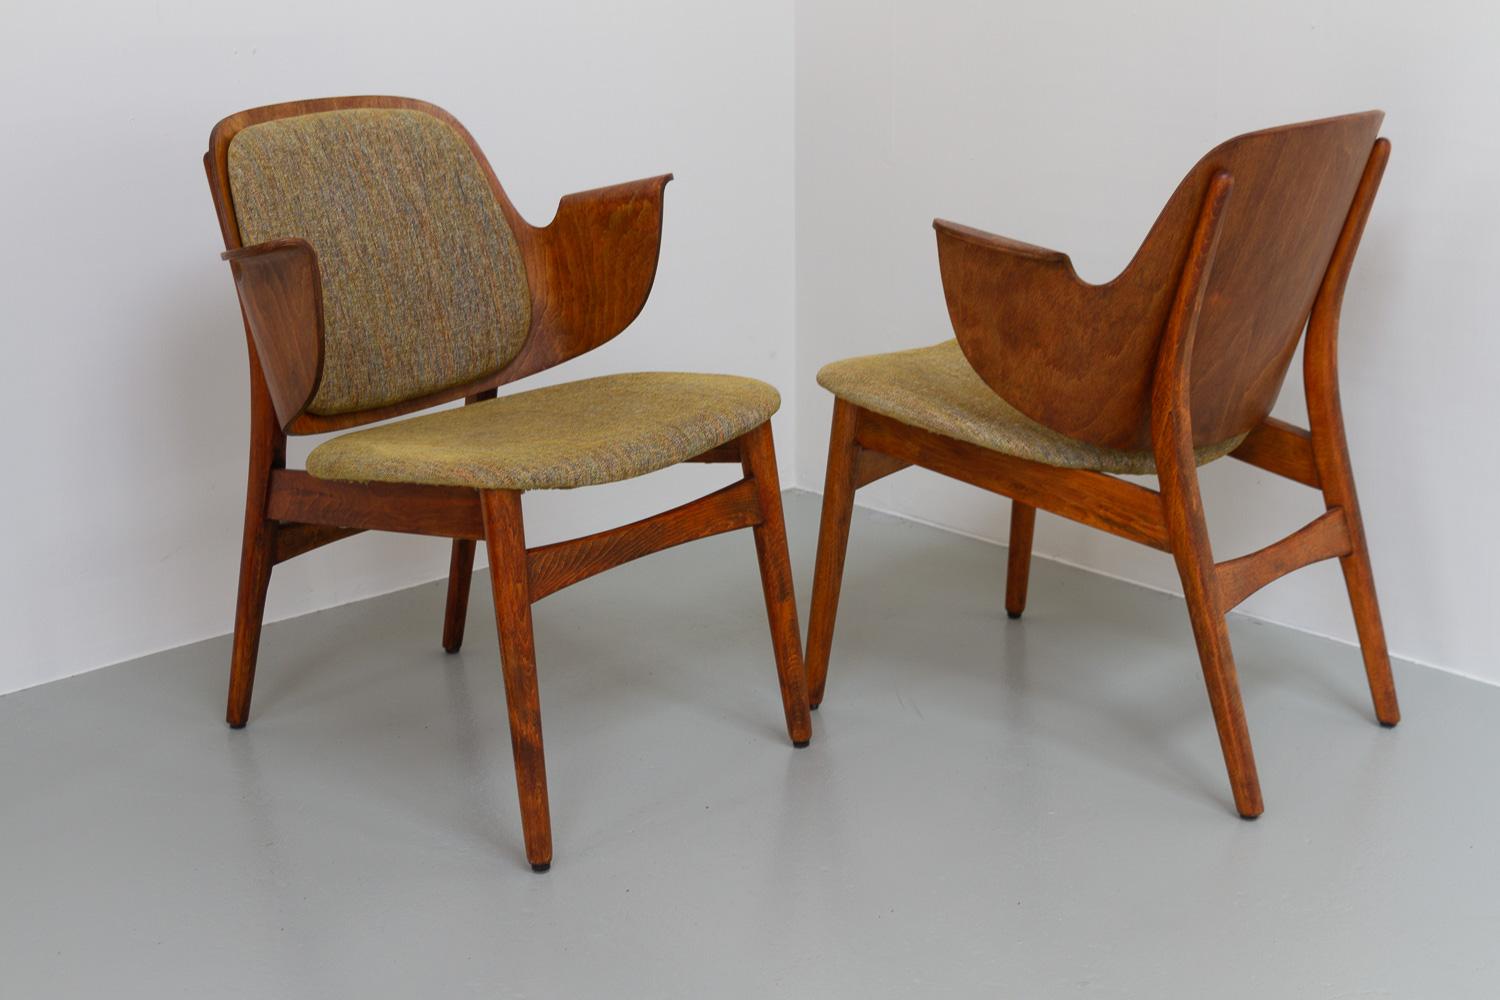 Danish Modern Armchairs by Hans Olsen for Bramin, 1950s. Set of 2.
Pair of Danish Mid-Century Modern Model 107 lounge chairs in stained oak by Danish architect Hans Olsen for Bramin, Denmark. 
Back and armrests in one piece of shaped laminated wood.